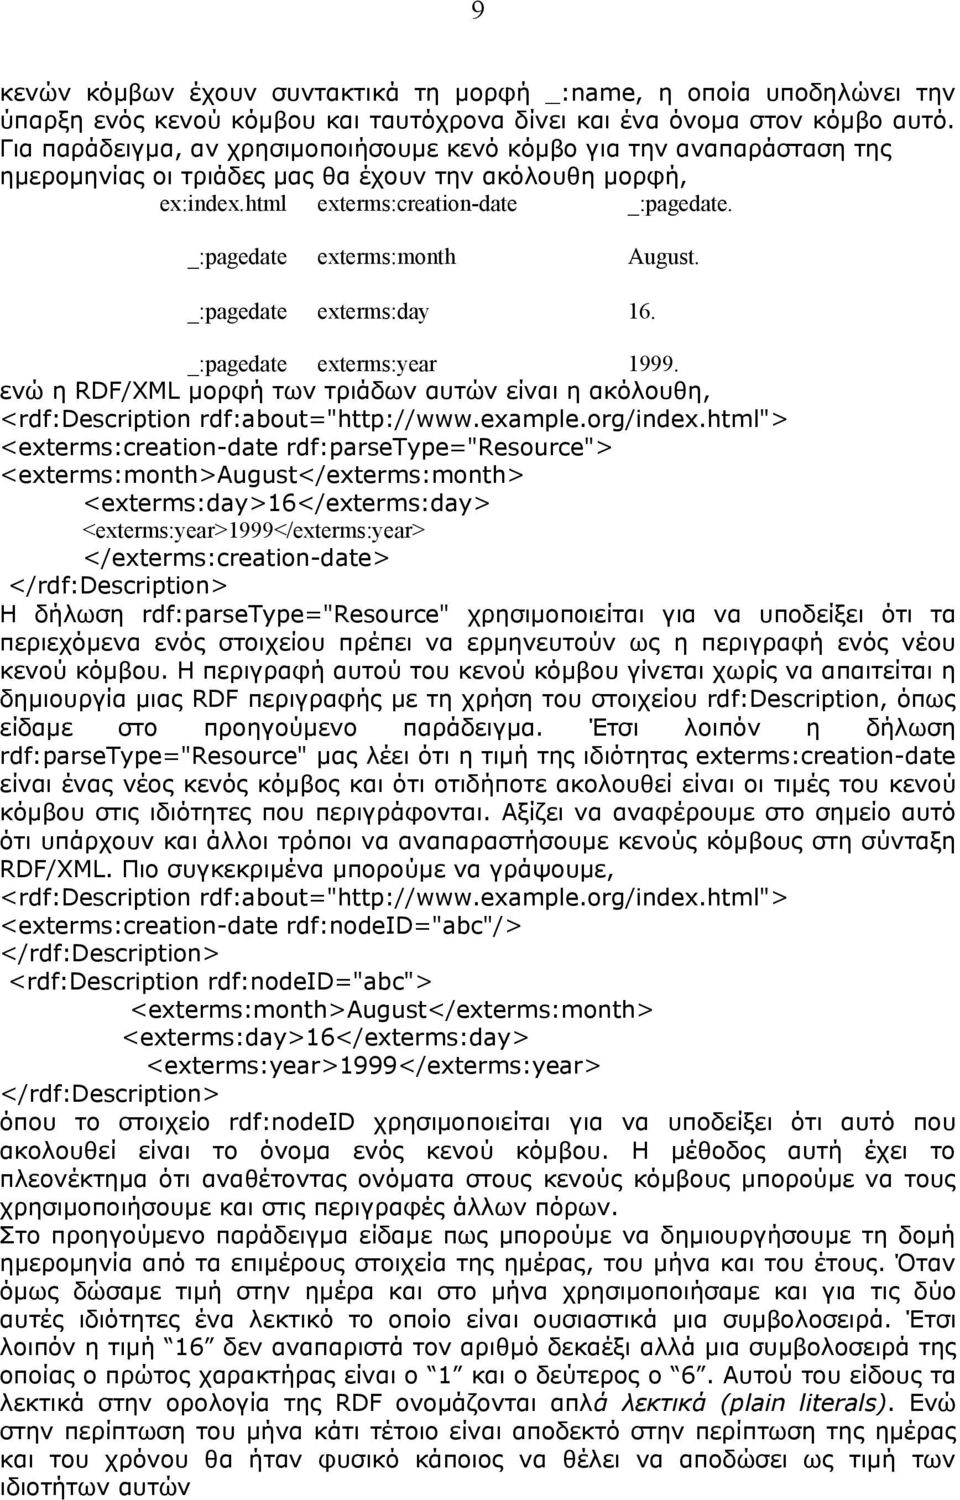 _:pagedate exterms:month August. _:pagedate exterms:day 16. _:pagedate exterms:year 1999. ενώ η RDF/XML μορφή των τριάδων αυτών είναι η ακόλουθη, <rdf:description rdf:about="http://www.example.